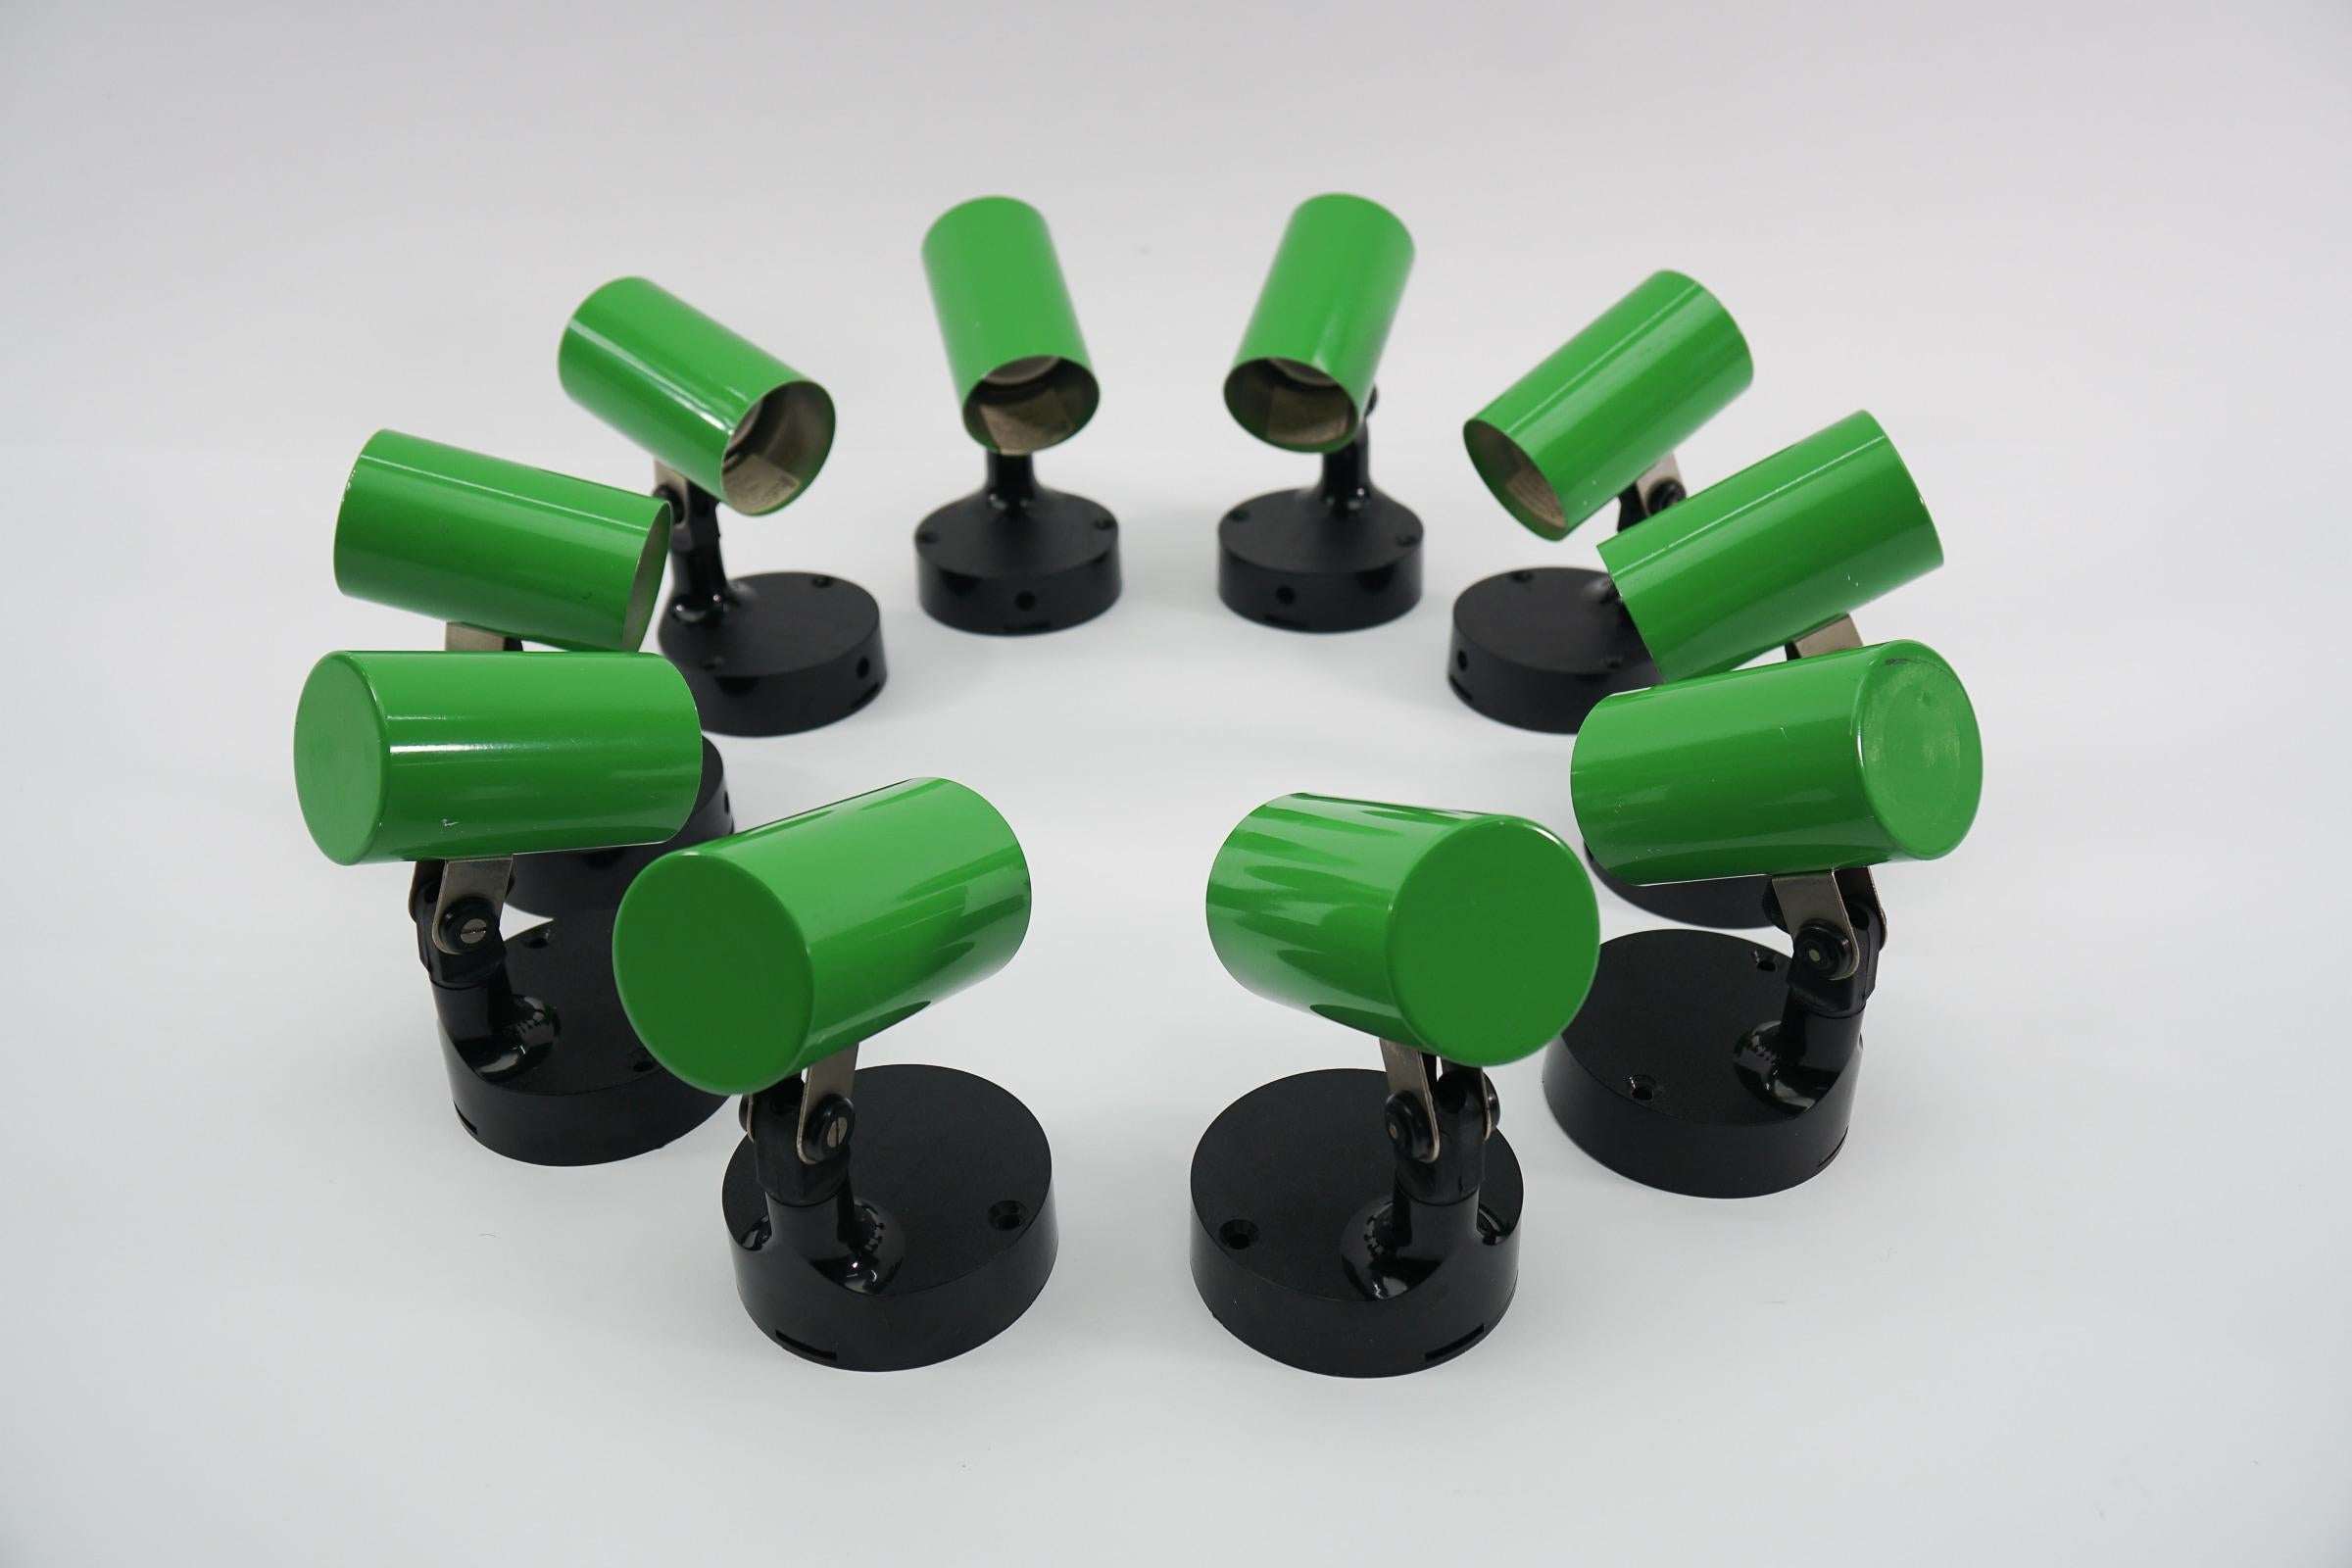 Mid-20th Century Set of 10 Green Wall or Ceiling Spot Lights by Massive, 1960s Belgium For Sale